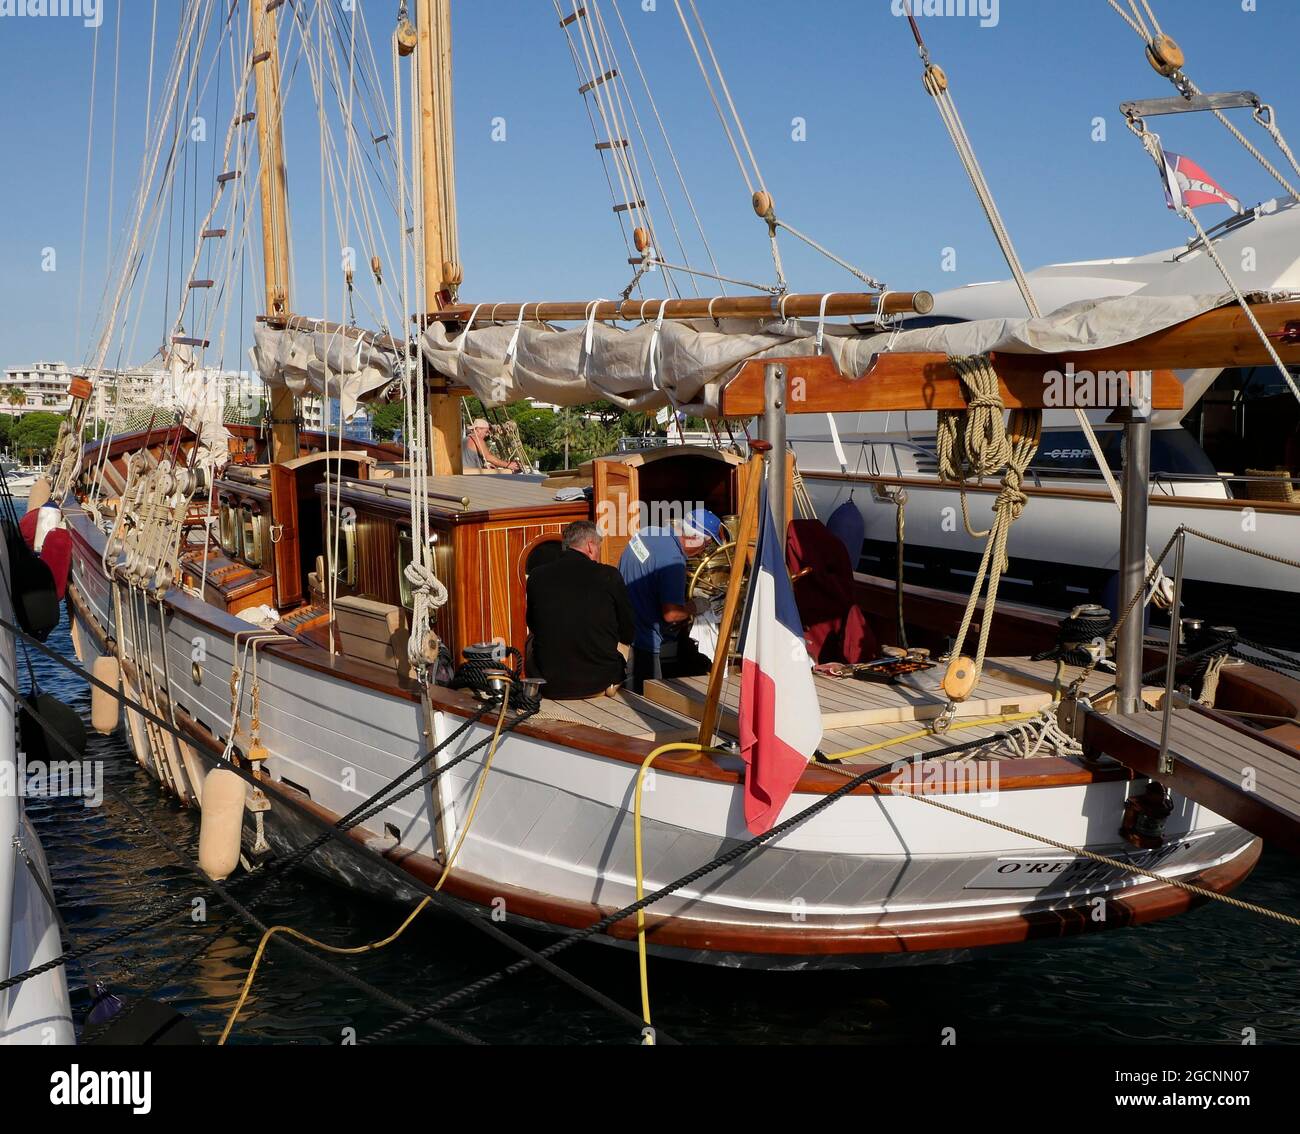 AJAXNETPHOTO. 2018. PORT CANTO, CANNES, FRANCE. - RESTORED SCHOONER YACHT - THE TWO MASTED SCHOONER LUXURY YACHT O'REMINGTON BUILT IN NAPLES, ITALY IN 1946 AS A WINE TRANSPORTER; ONCE OWNED BY LORD REMINGTON OF THE AMERICAN REMINGTON GUNS AND TYPEWRITER MANUFACTURER, MOORED IN THE TOWN MARINA, COTE D'AZUR RIVIERA.PHOTO:JONATHAN EASTLAND/AJAX REF:GX8 182809 658 Stock Photo